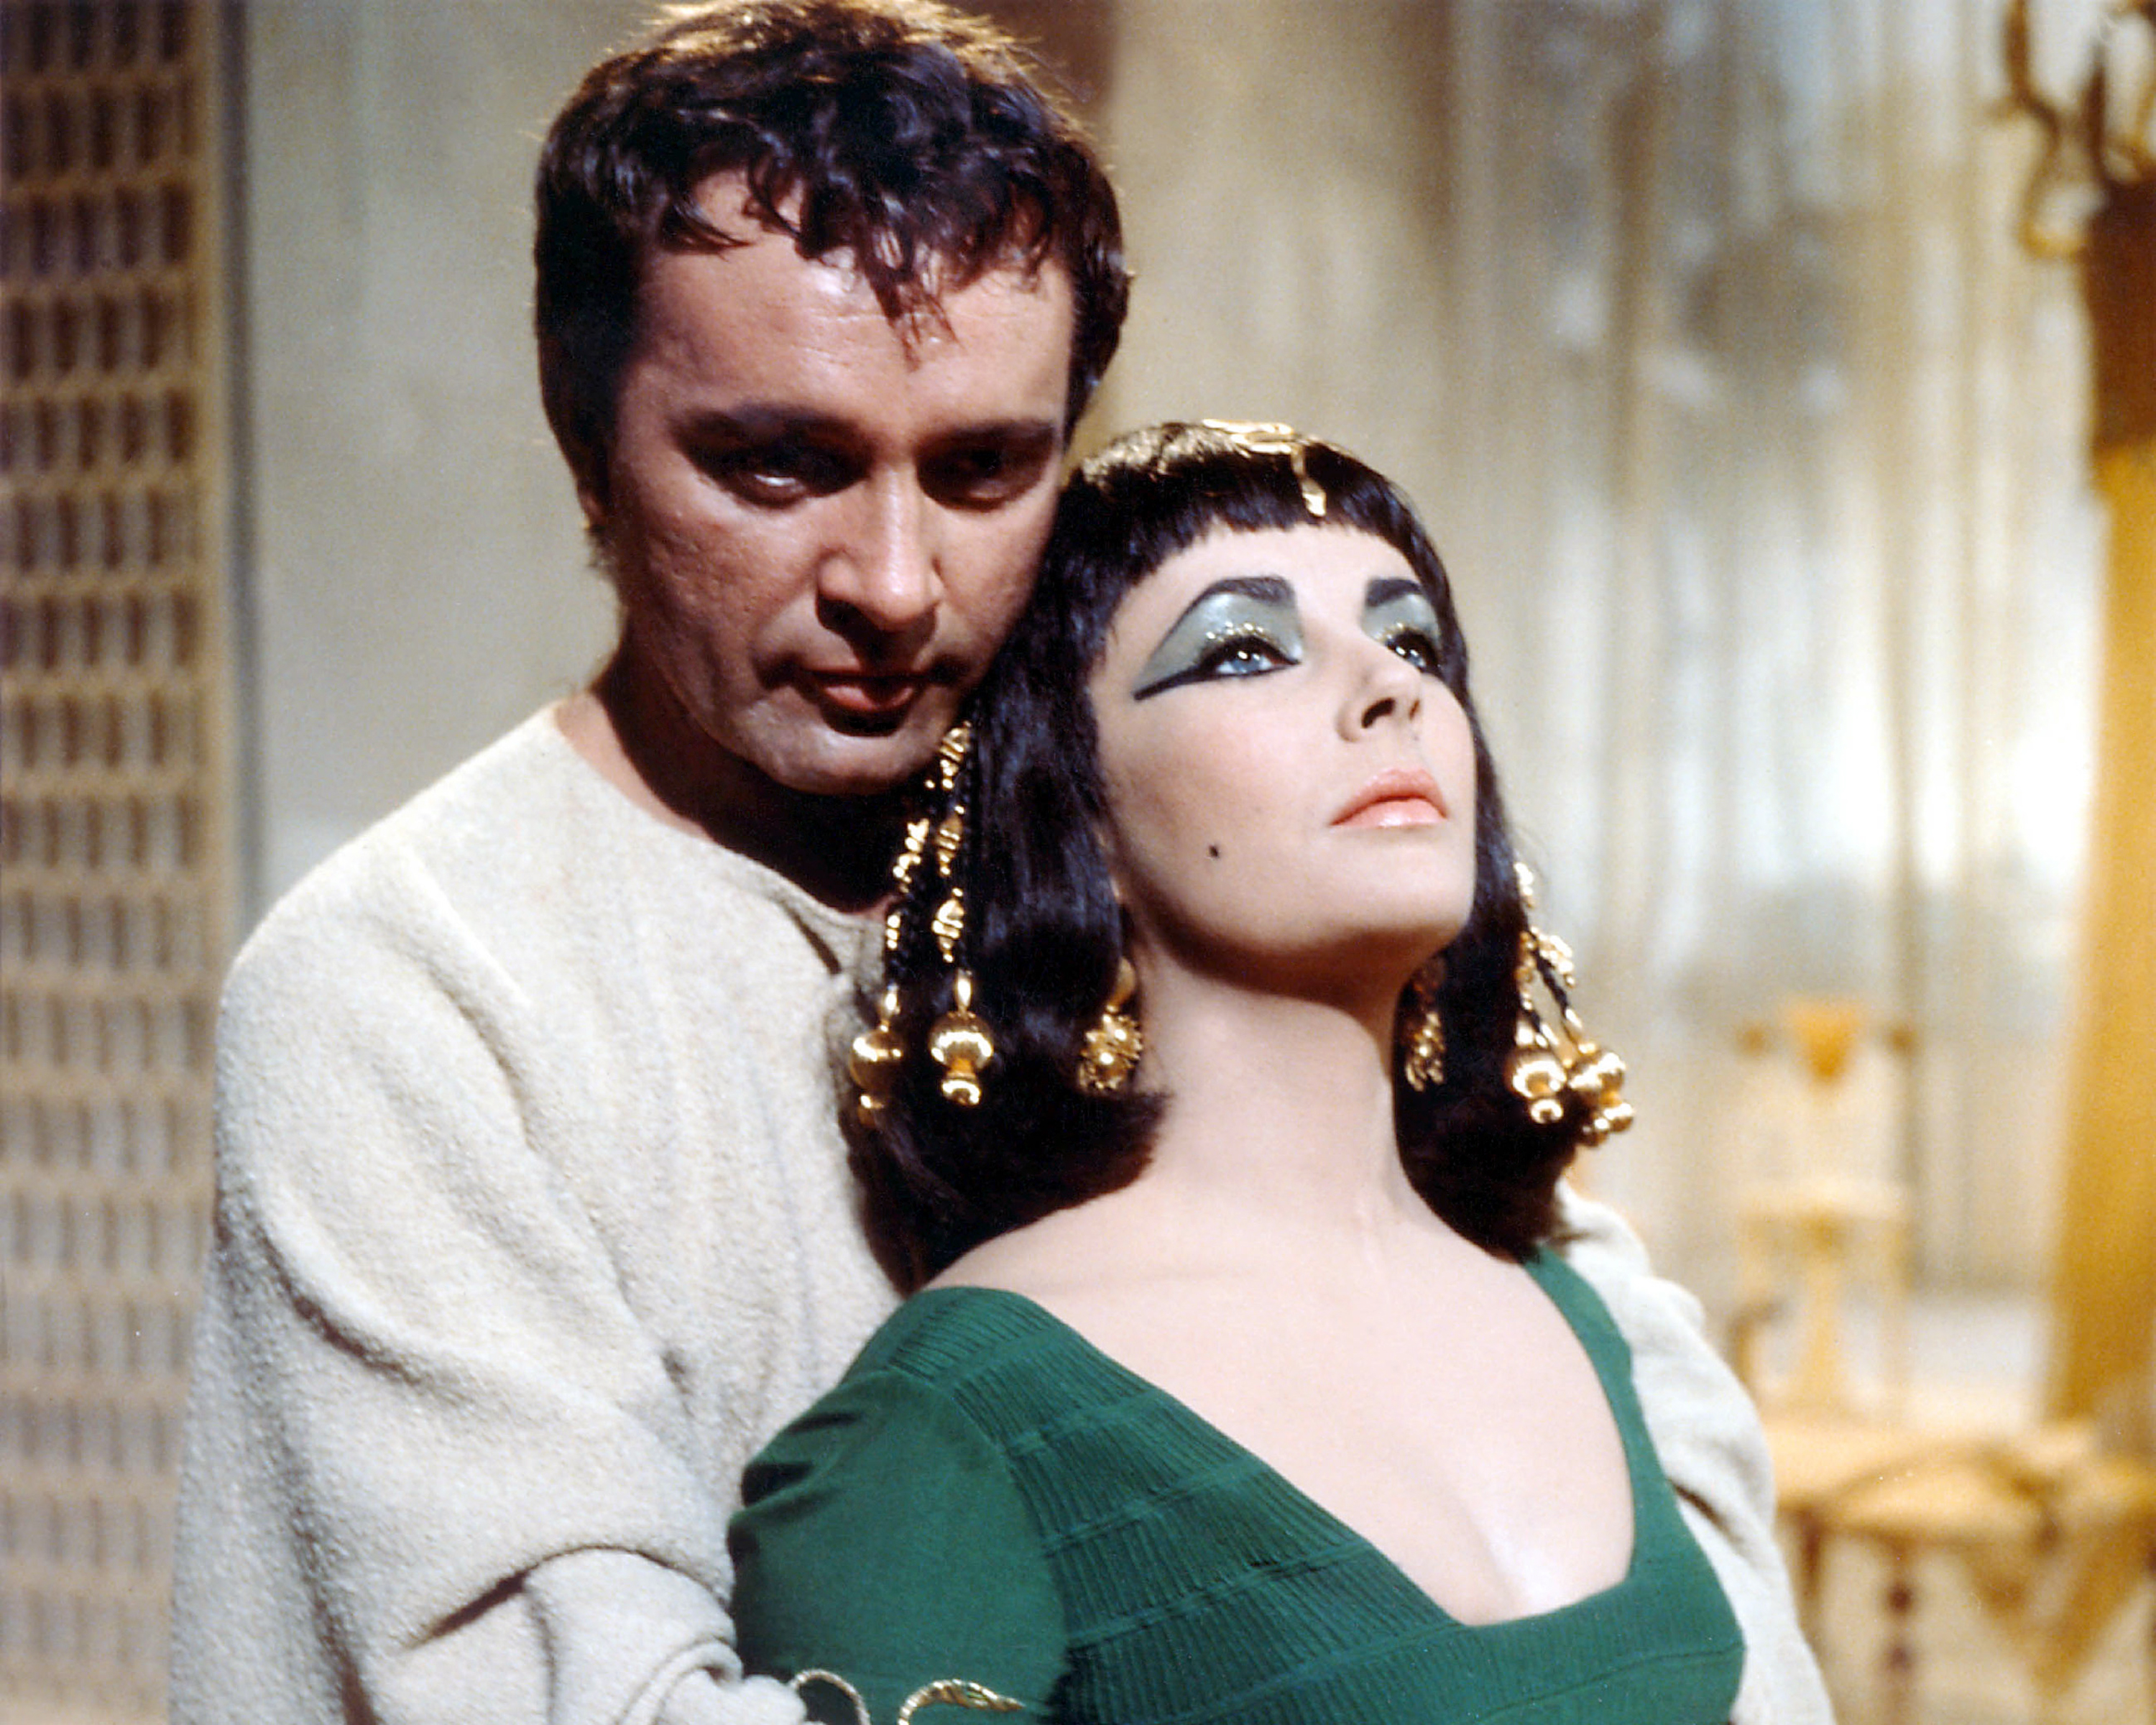 Elizabeth Taylor as Cleopatra and Richard Burton as Mark Antony in the 1963 film "Cleopatra." | Source: Getty Images